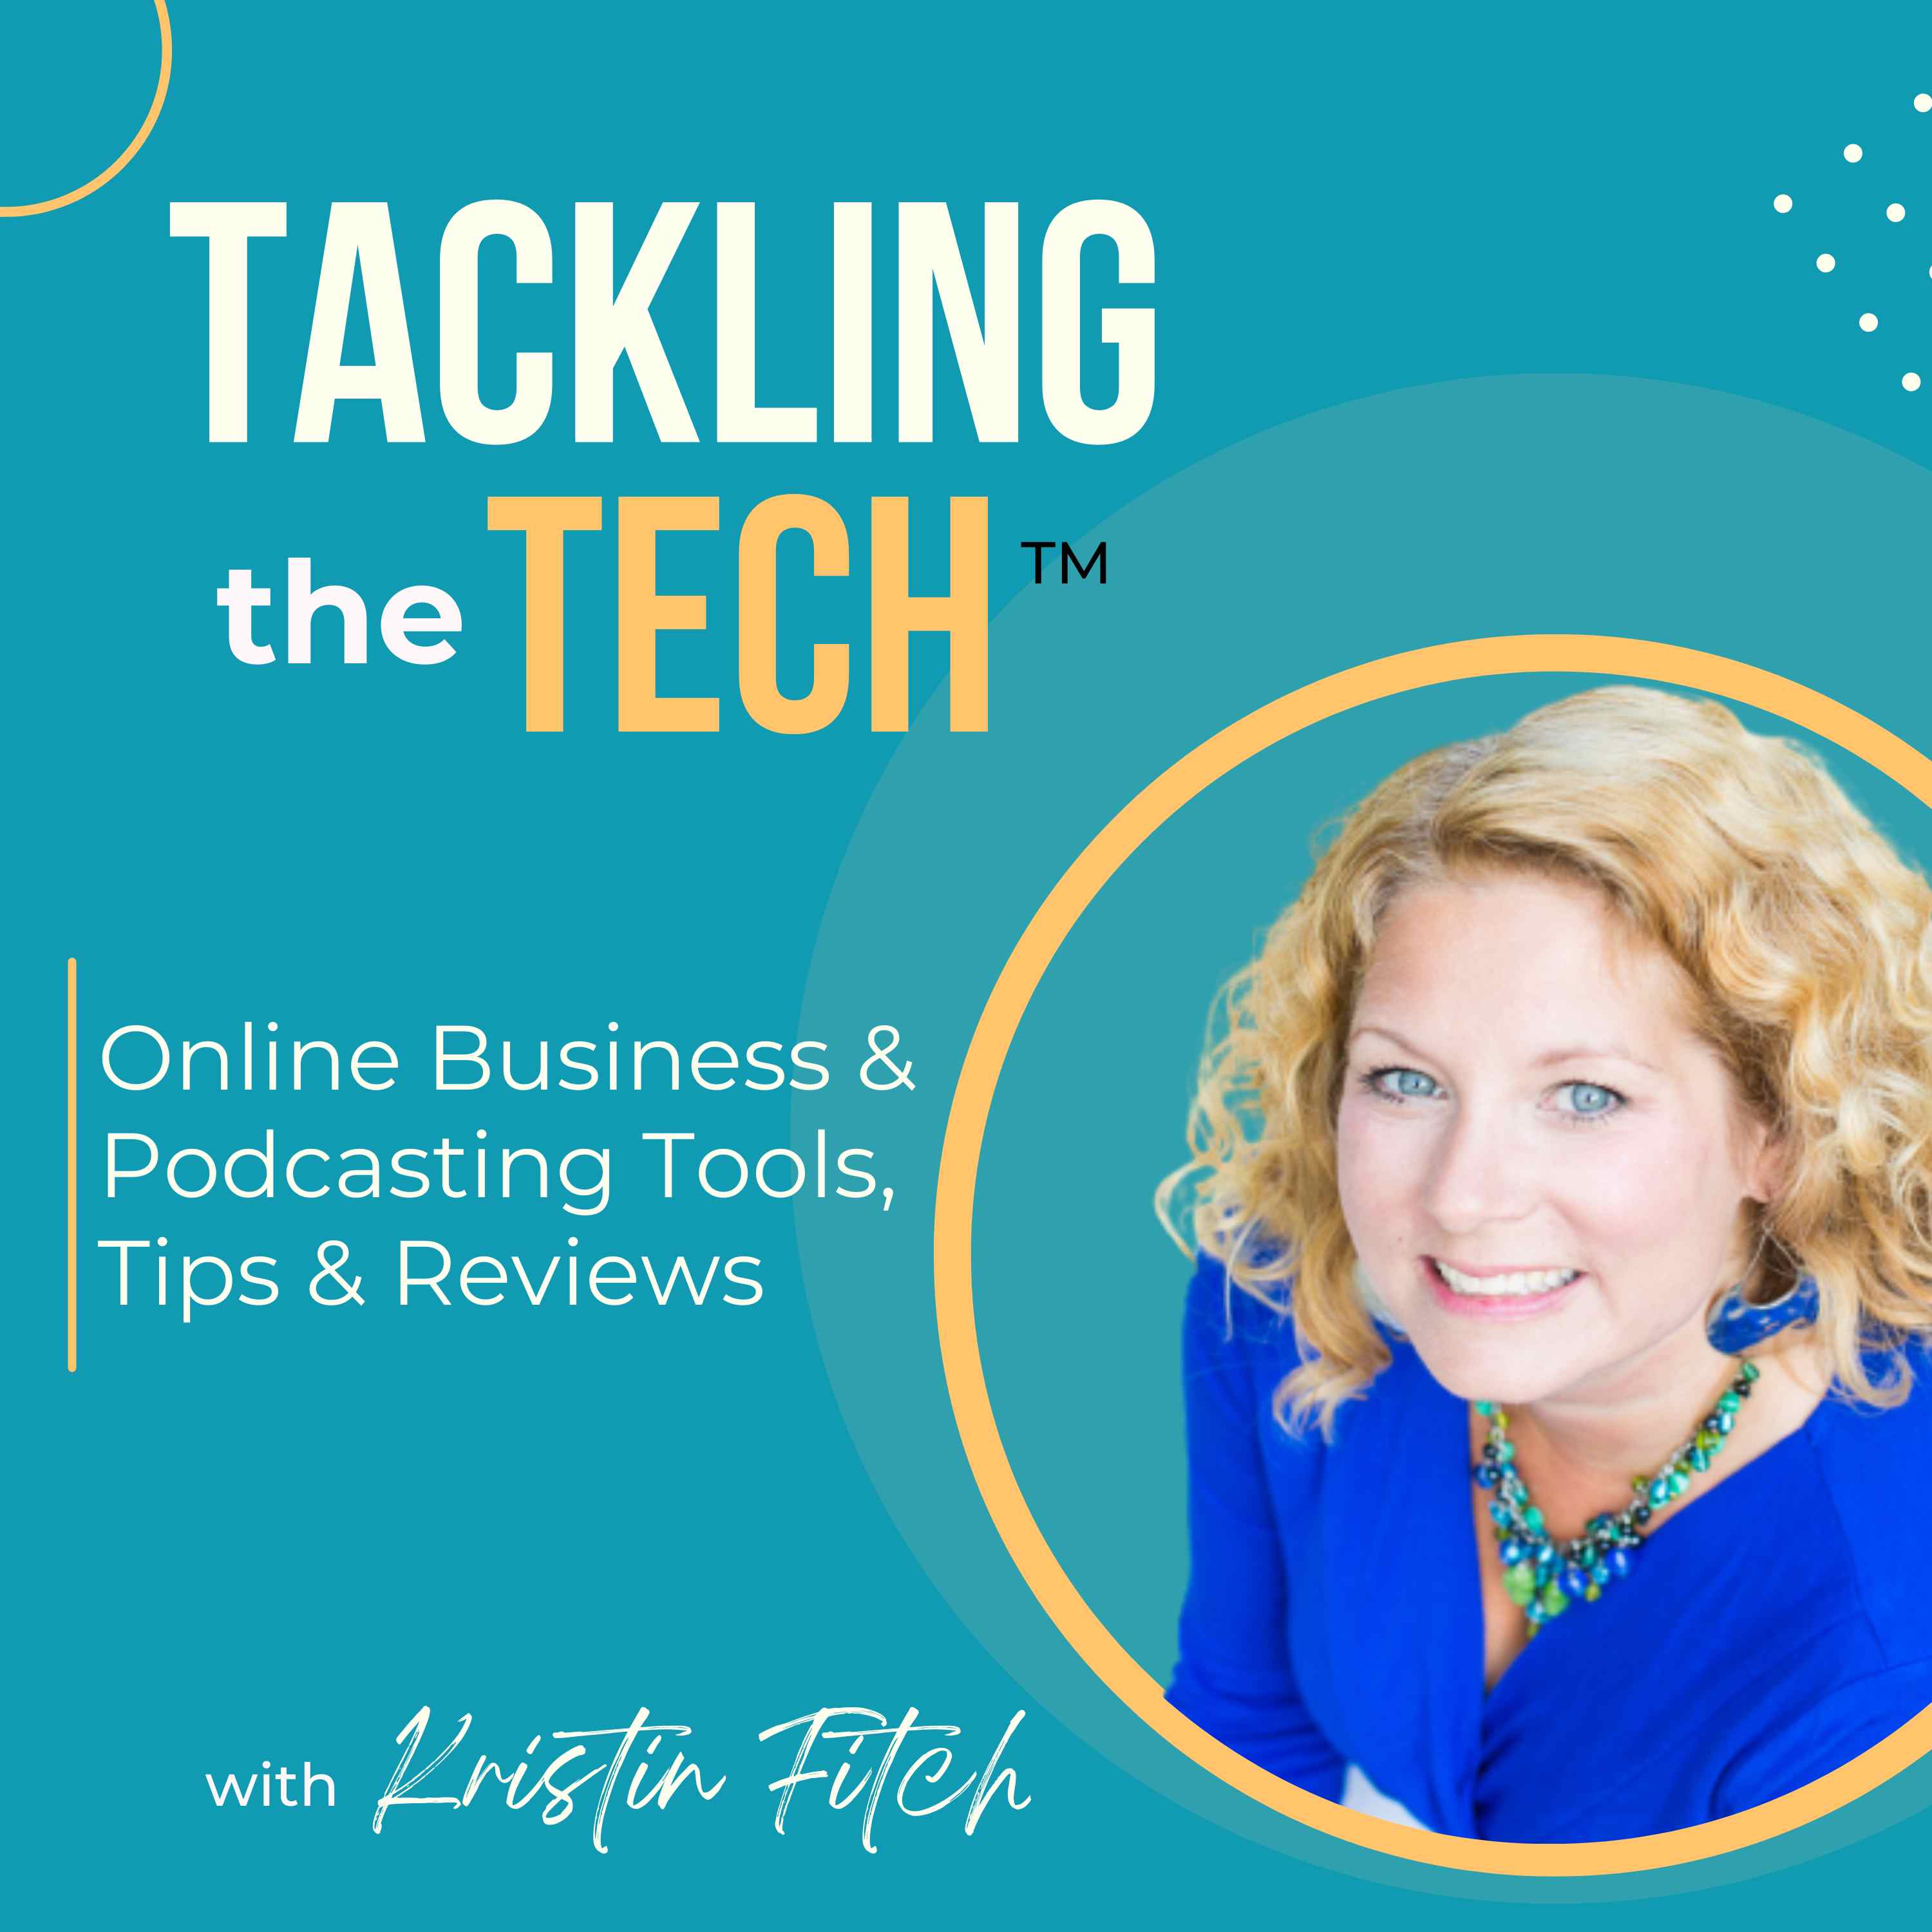 Artwork for Tackling the Tech - Podcasting, Productivity & Online Marketing & Business